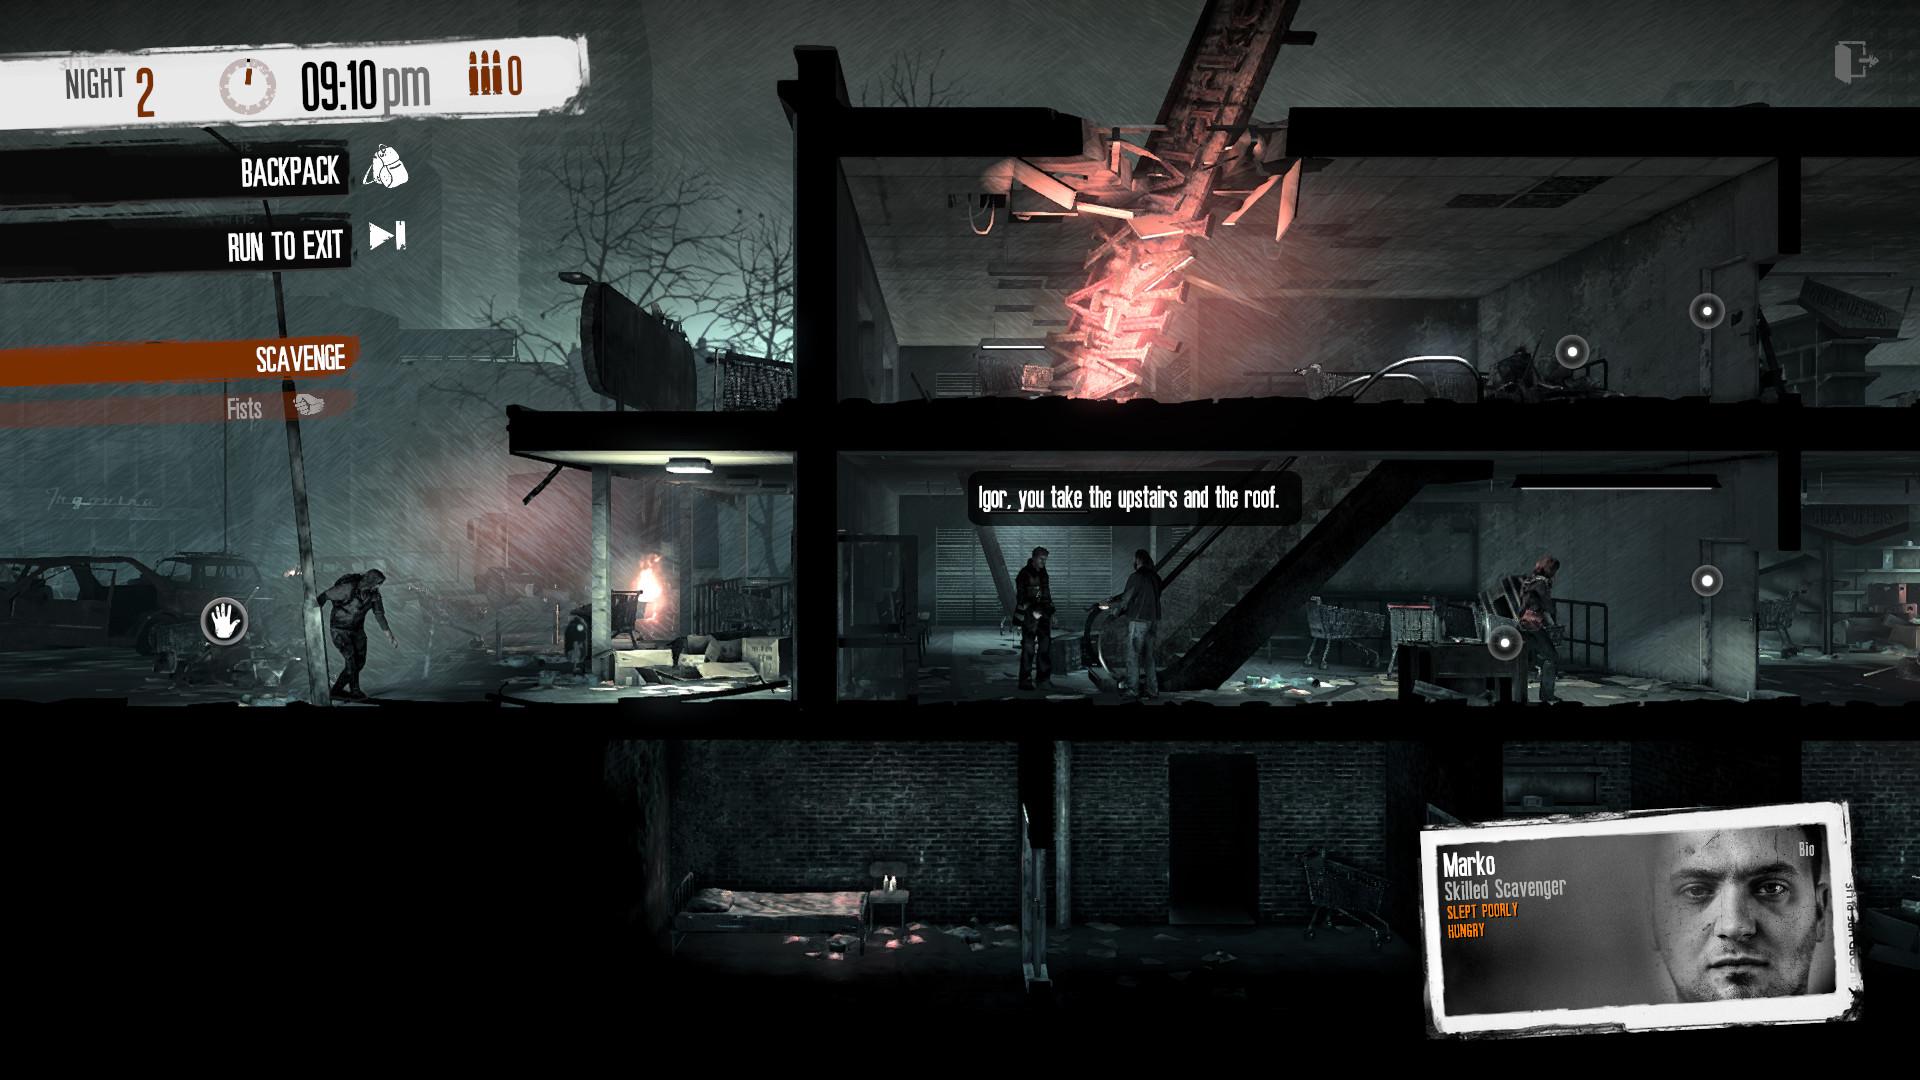 Screenshot №10 from game This War of Mine